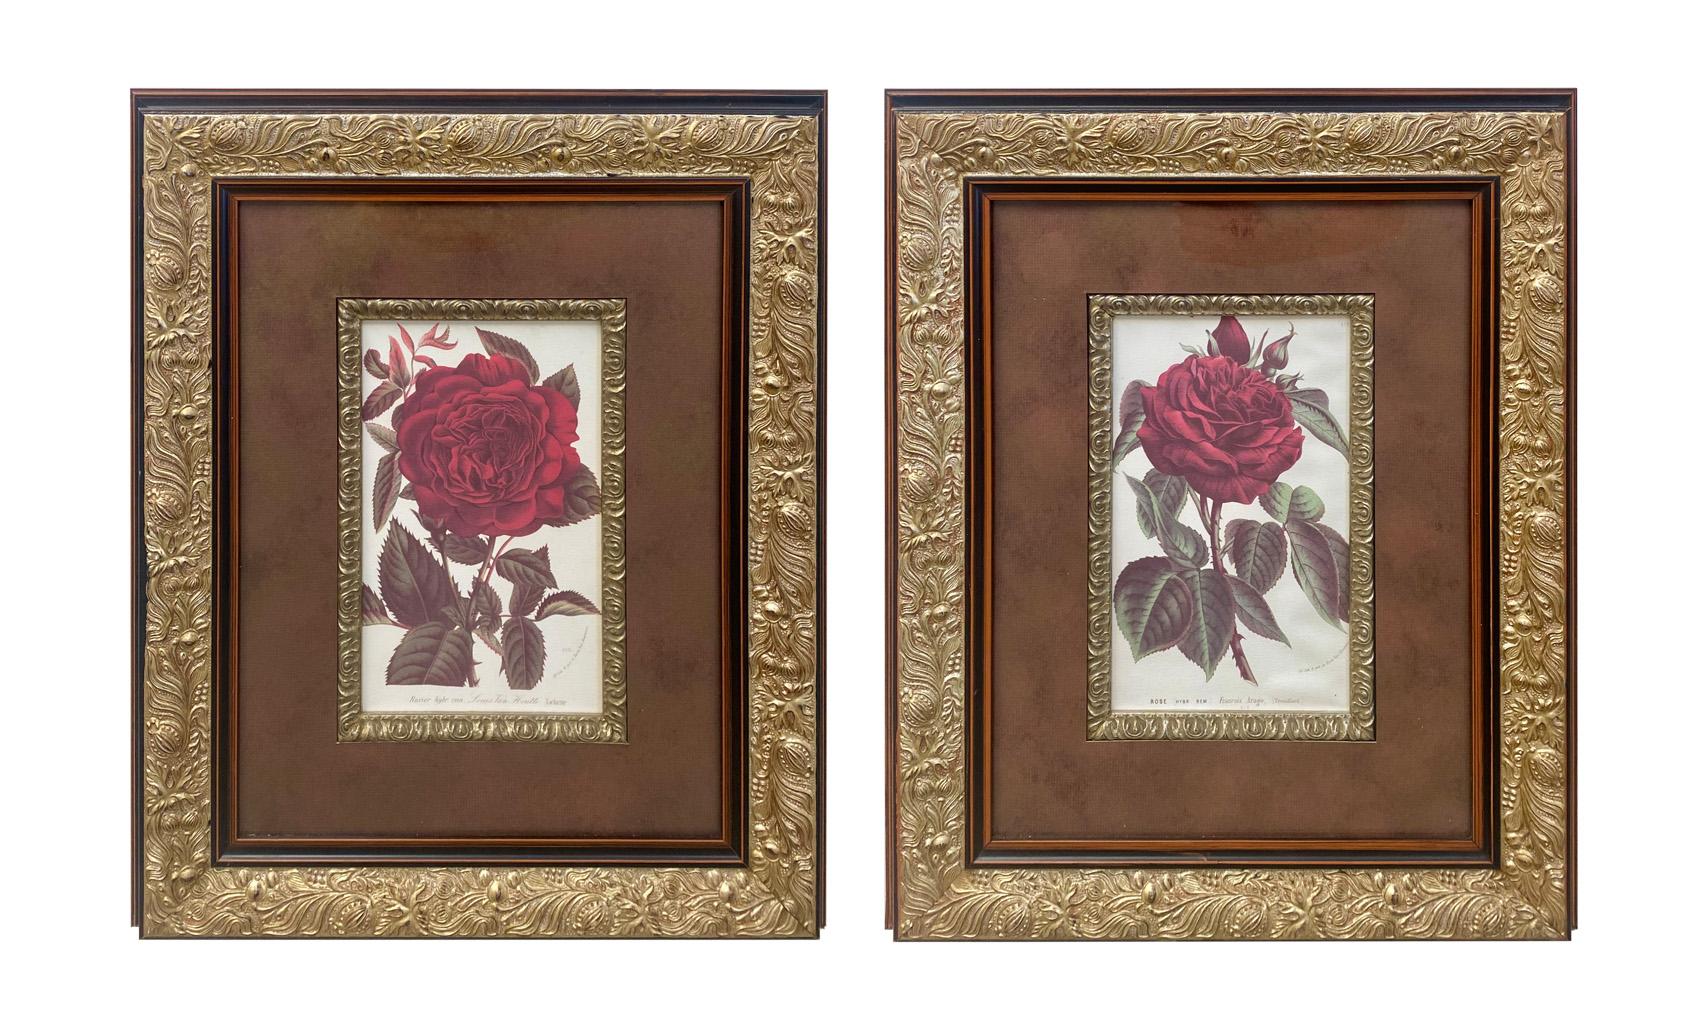 An exceptional original pair of Red Rose antique botanicals one is titled Rosa 'François Arago' by Victor Trouillard (France, 1858) and the second one is titled 'La Charme' by Louis van Houtte ( Belgium , 1810- 1876). Both Lithographs are printed on